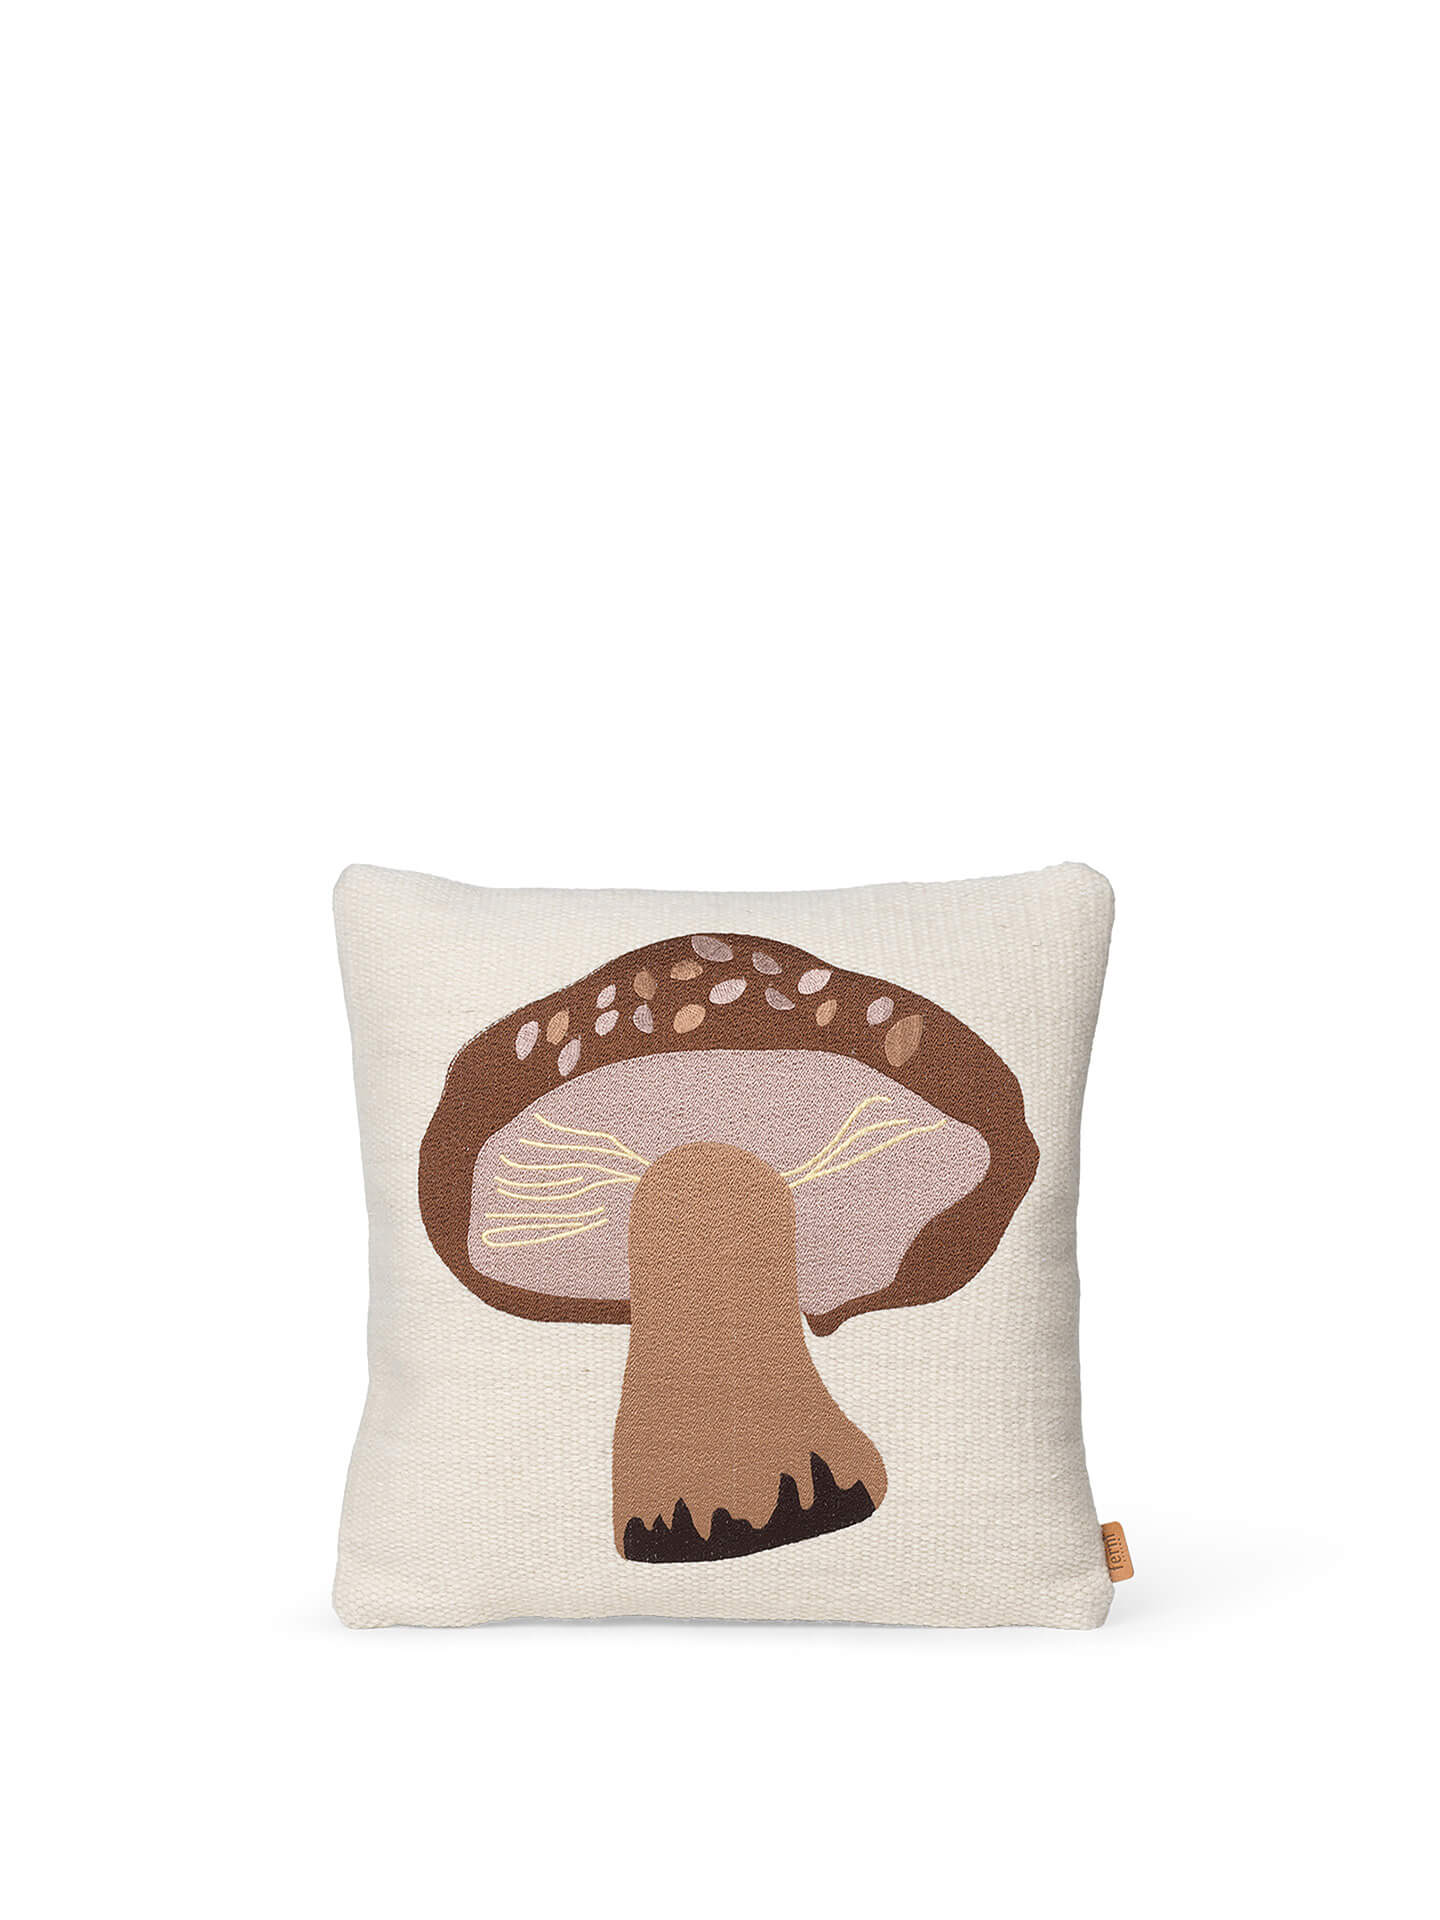 Forest Embroidered Cushion | Porcini | by ferm Living - Lifestory - ferm LIVING